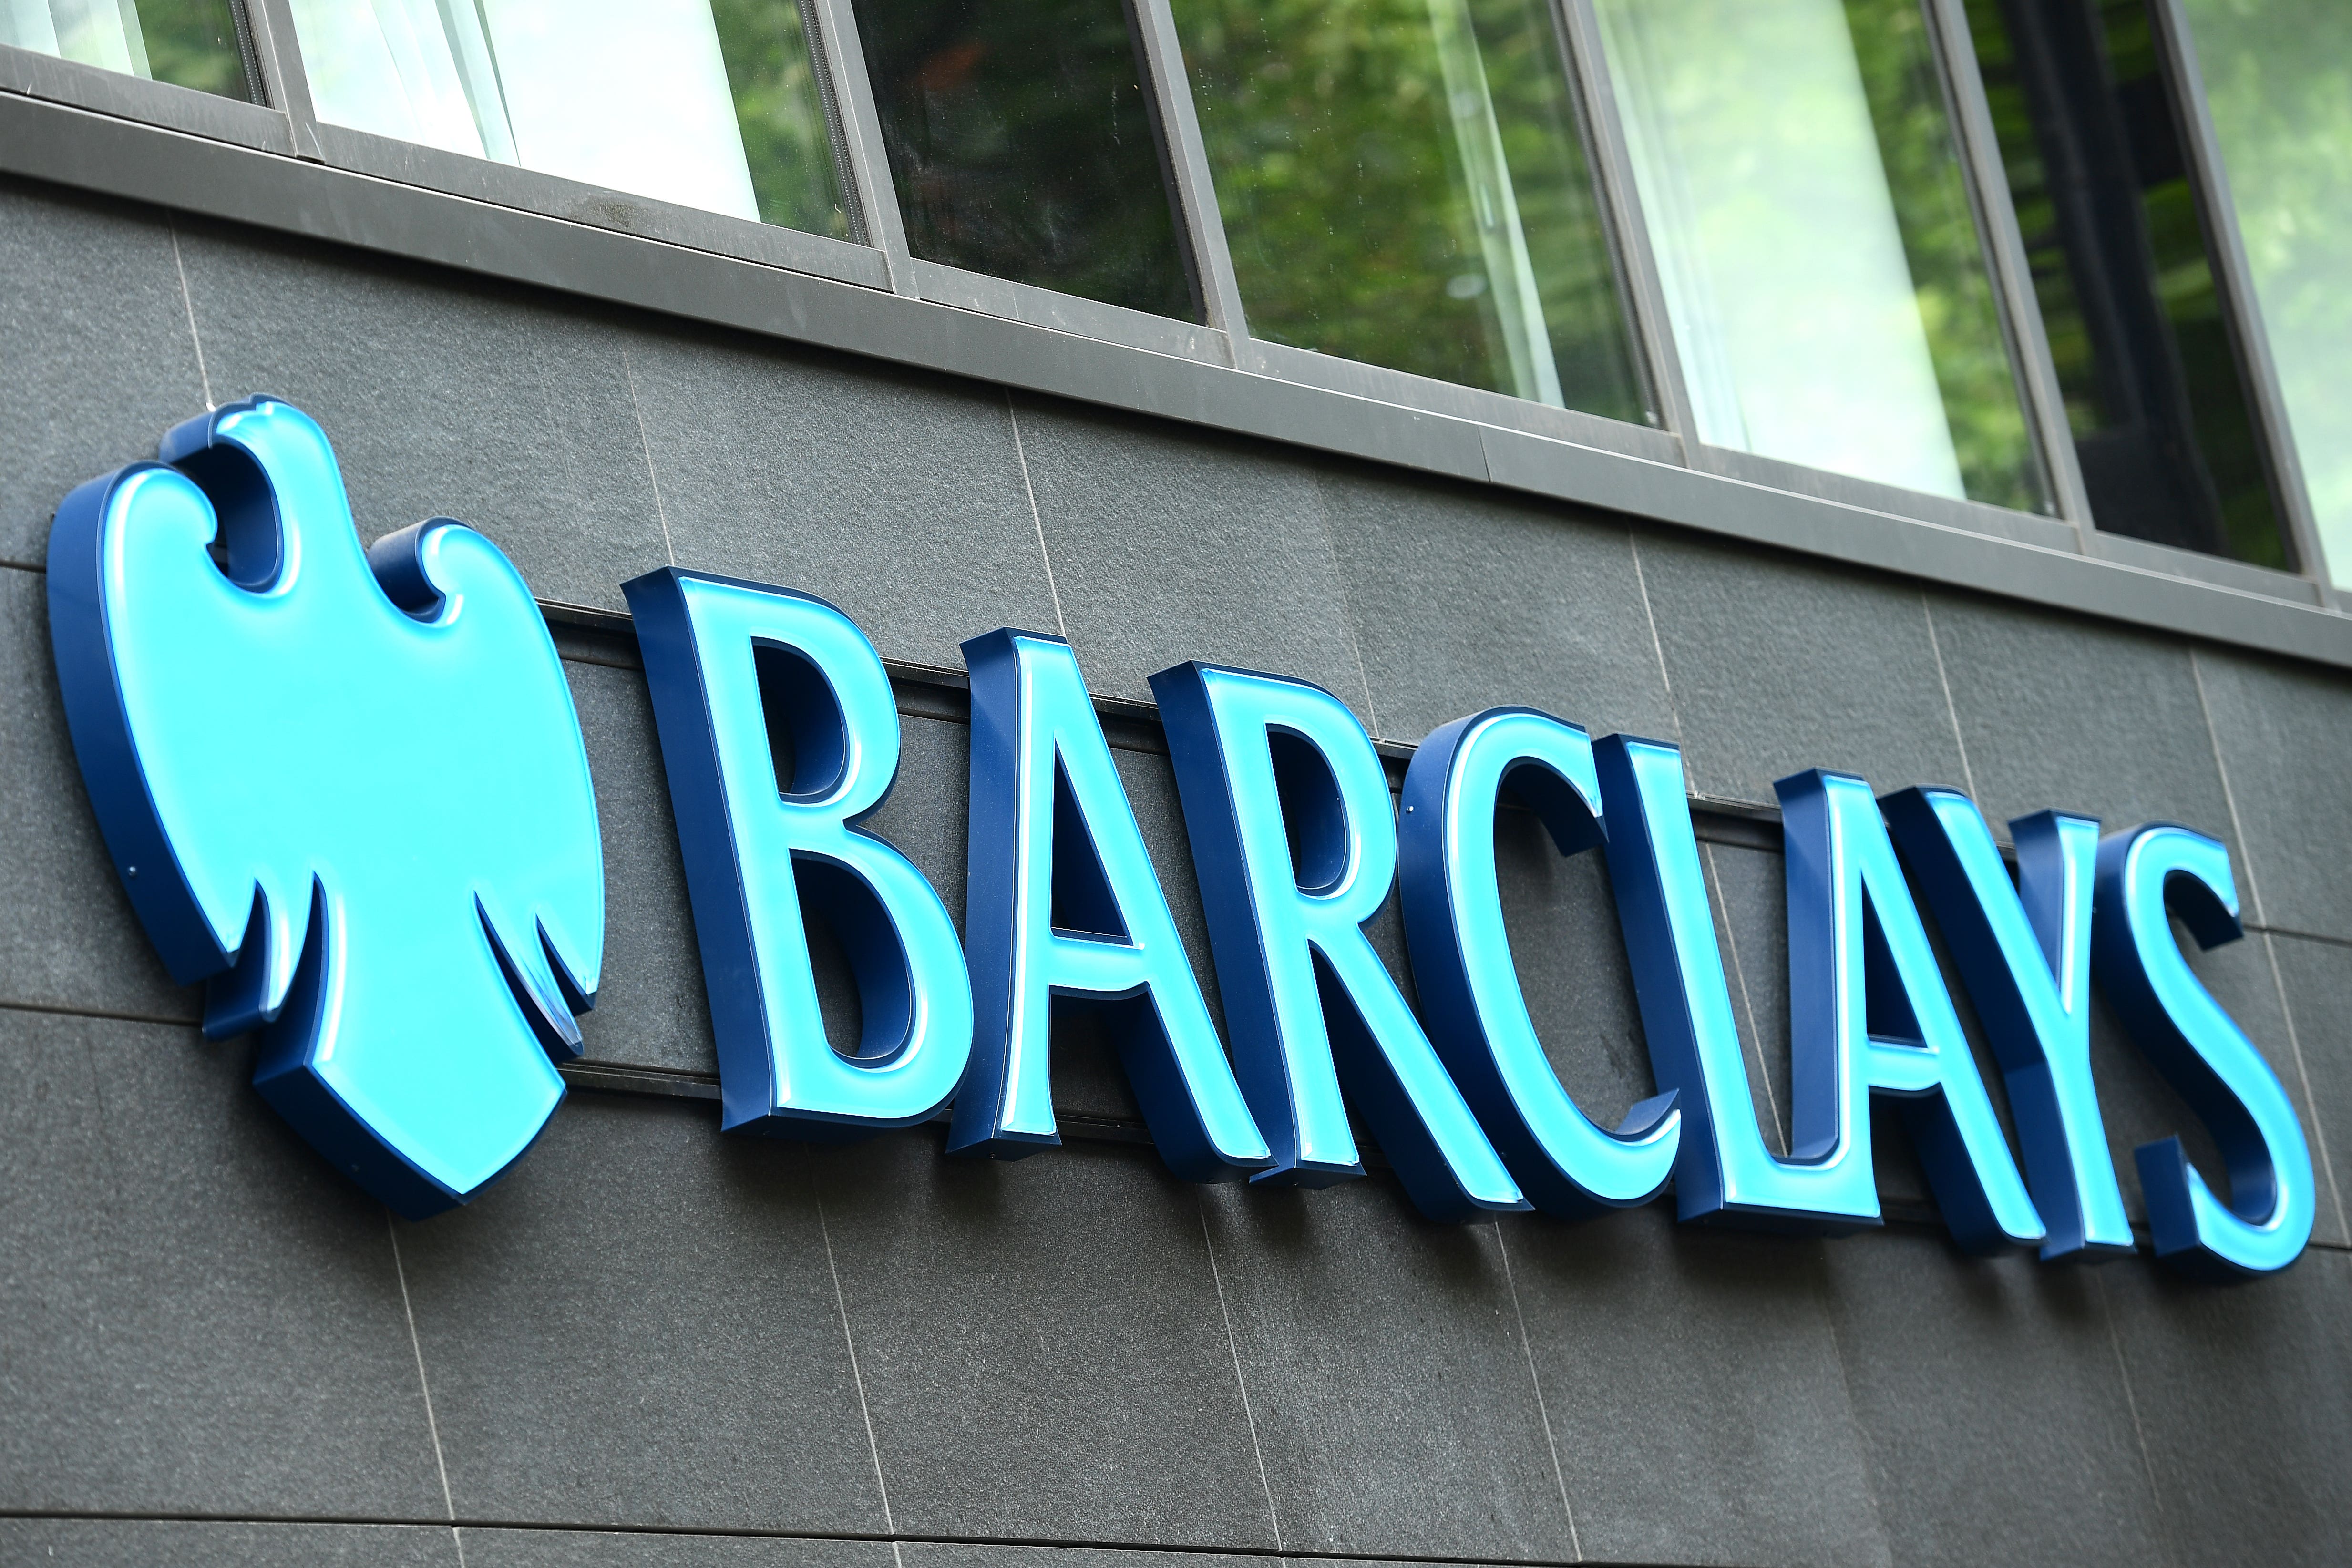 Barclays plans to launch a string of banking pods after recently announcing more branch closures (Ian West/PA)